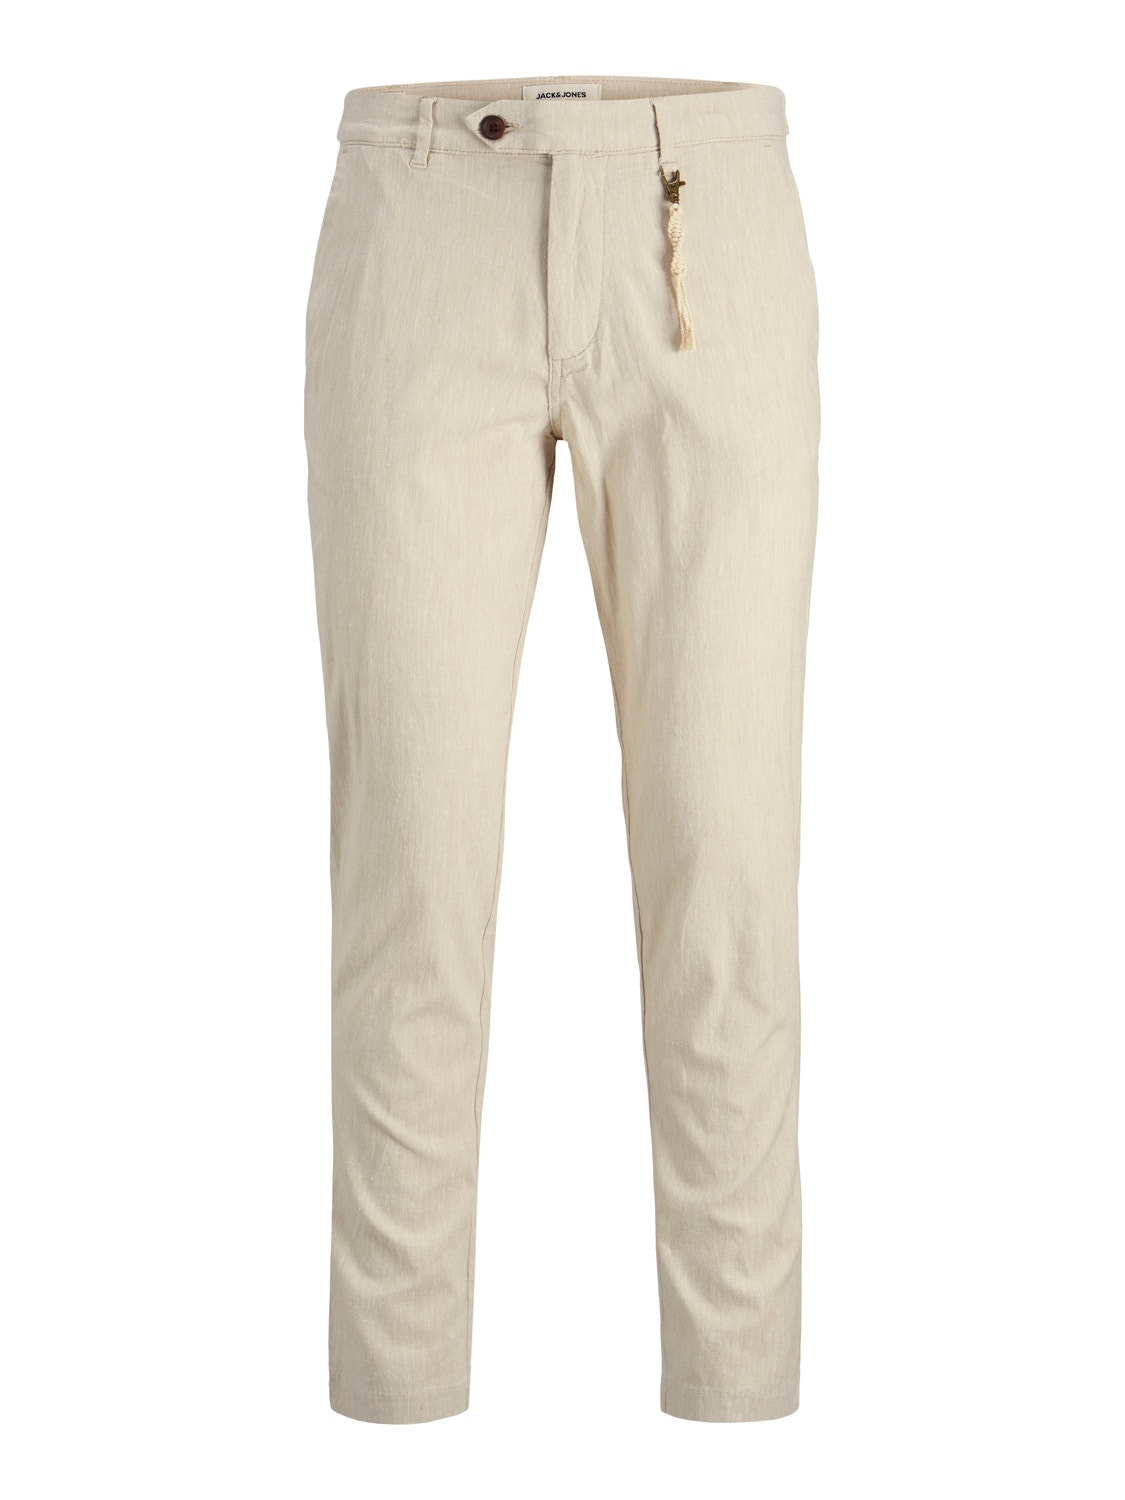 Jack & Jones Carrot fit Chino trousers -White Pepper - 12210125